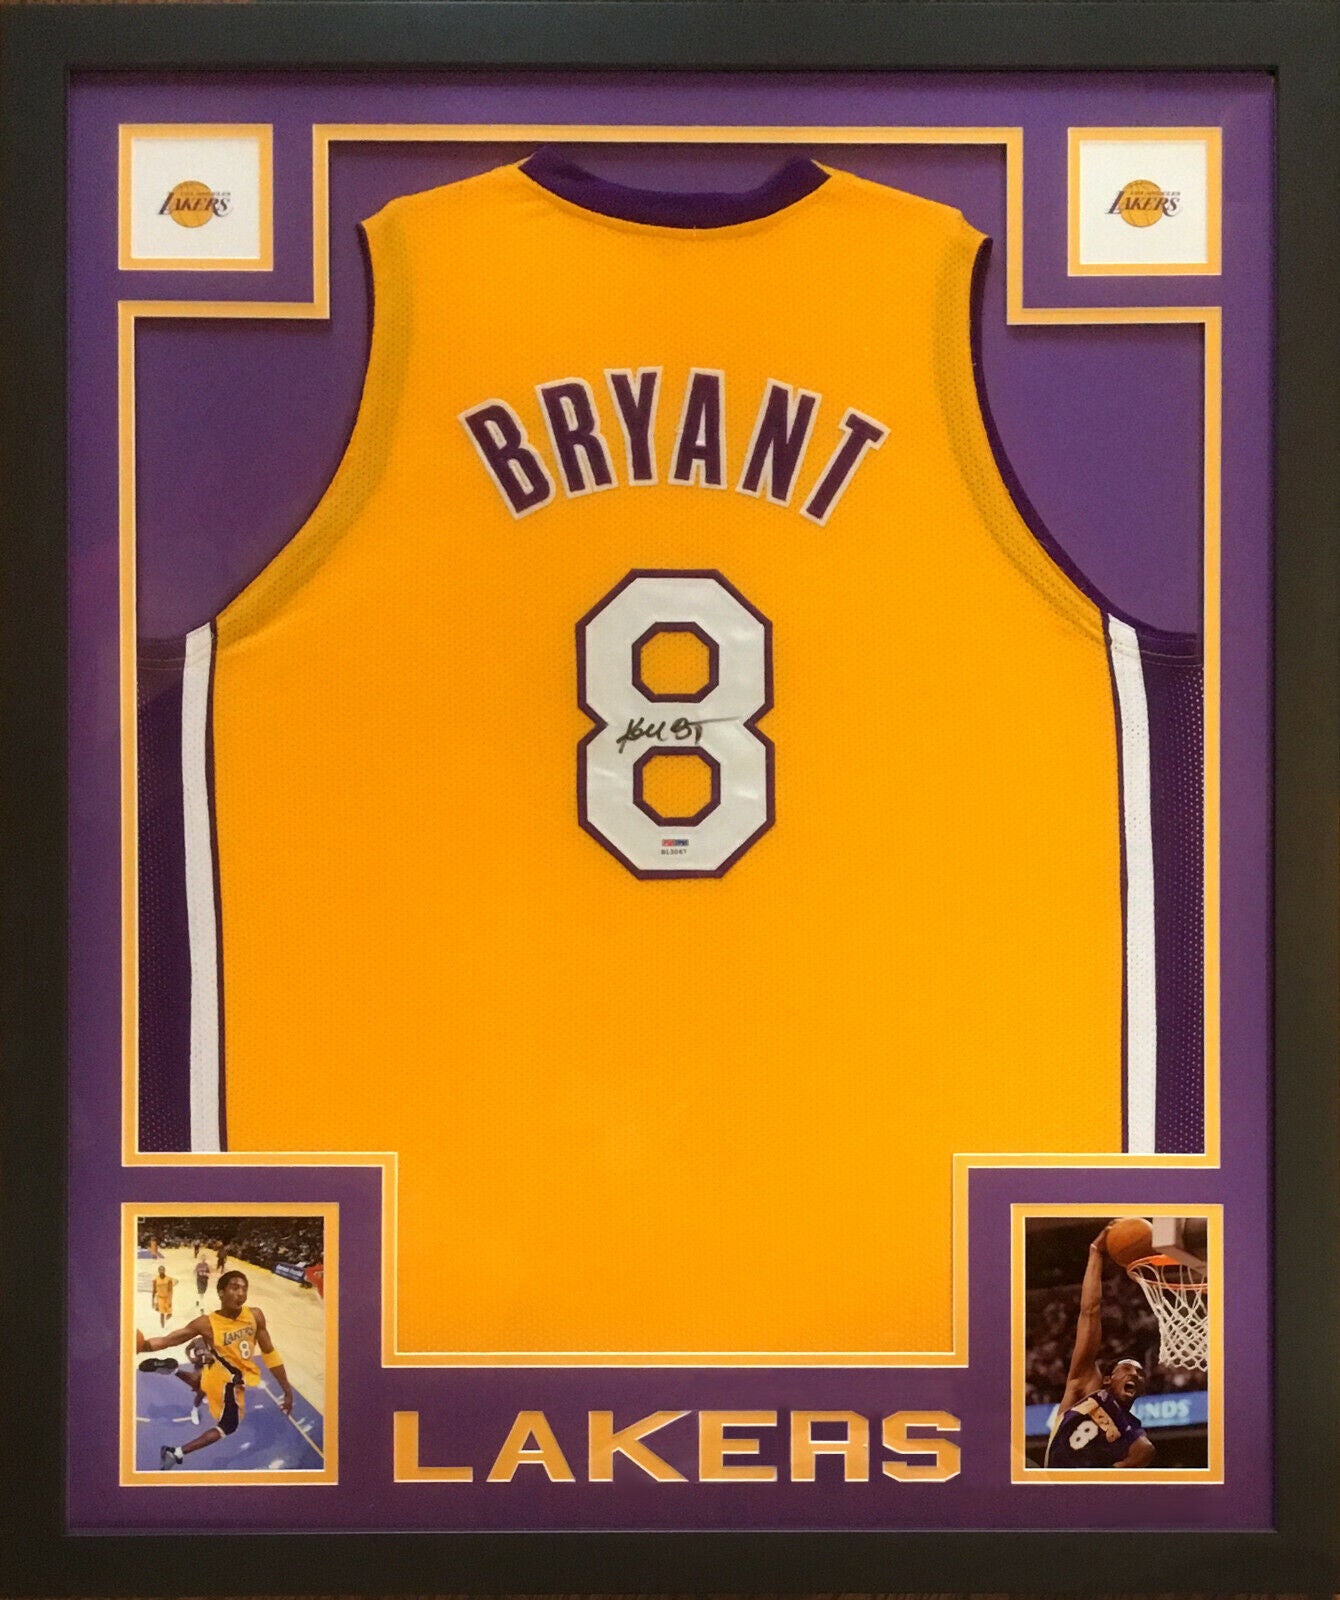 Sold at Auction: Kobe Bryant Signed #8 Lakers Jersey w/ Career